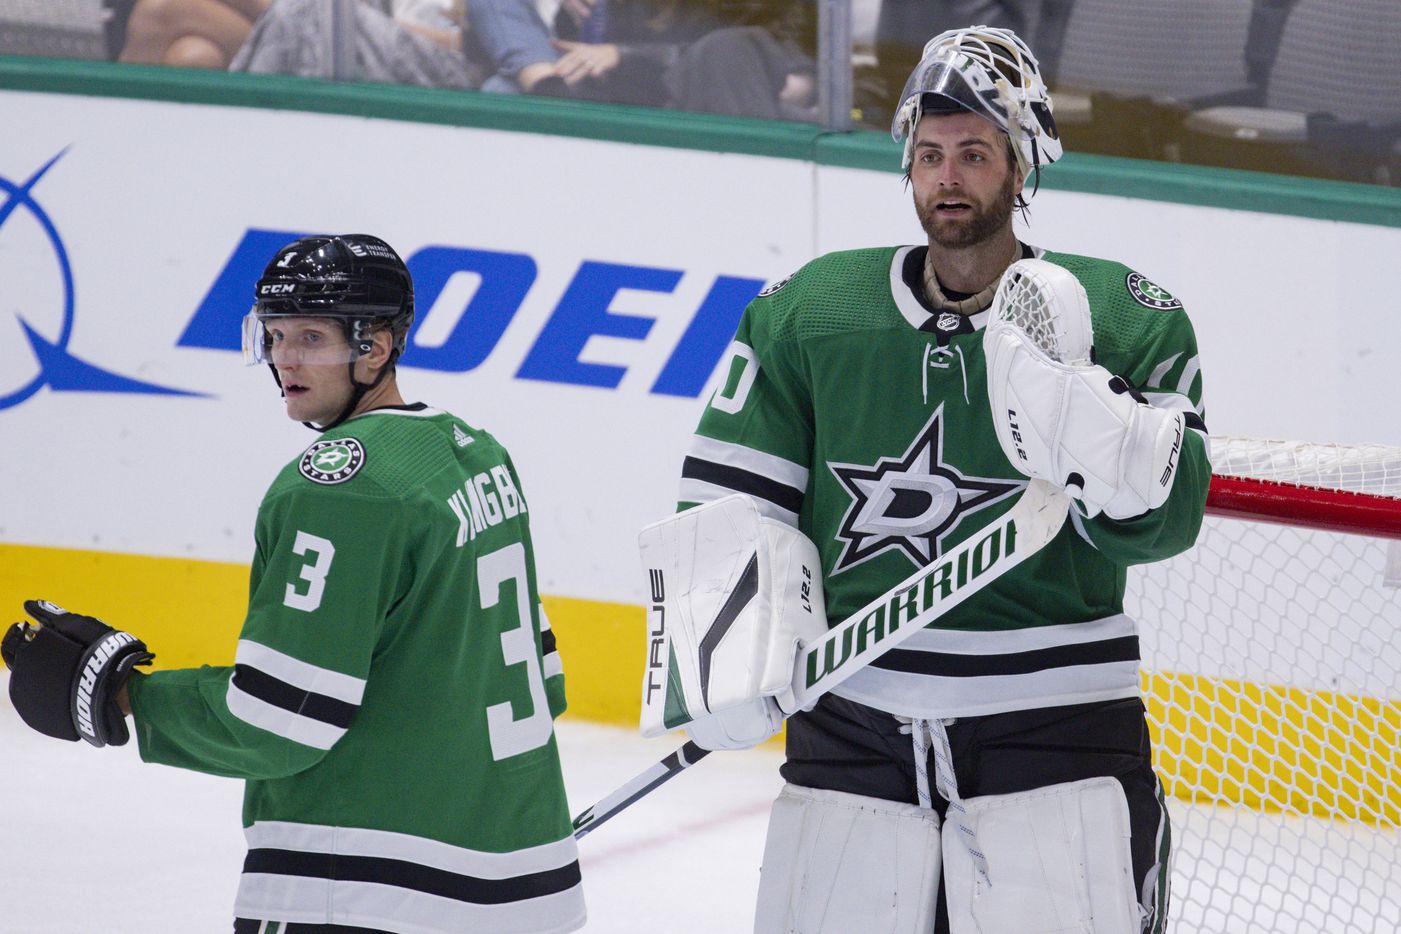 Dallas Stars defenseman John Klingberg (3) and Dallas Stars goaltender Braden Holtby (70) during the third period of a Dallas Stars preseason game against St. Louis Blues on Tuesday, Oct. 5, 2021, at American Airlines Center in Dallas. (Juan Figueroa/The Dallas Morning News)